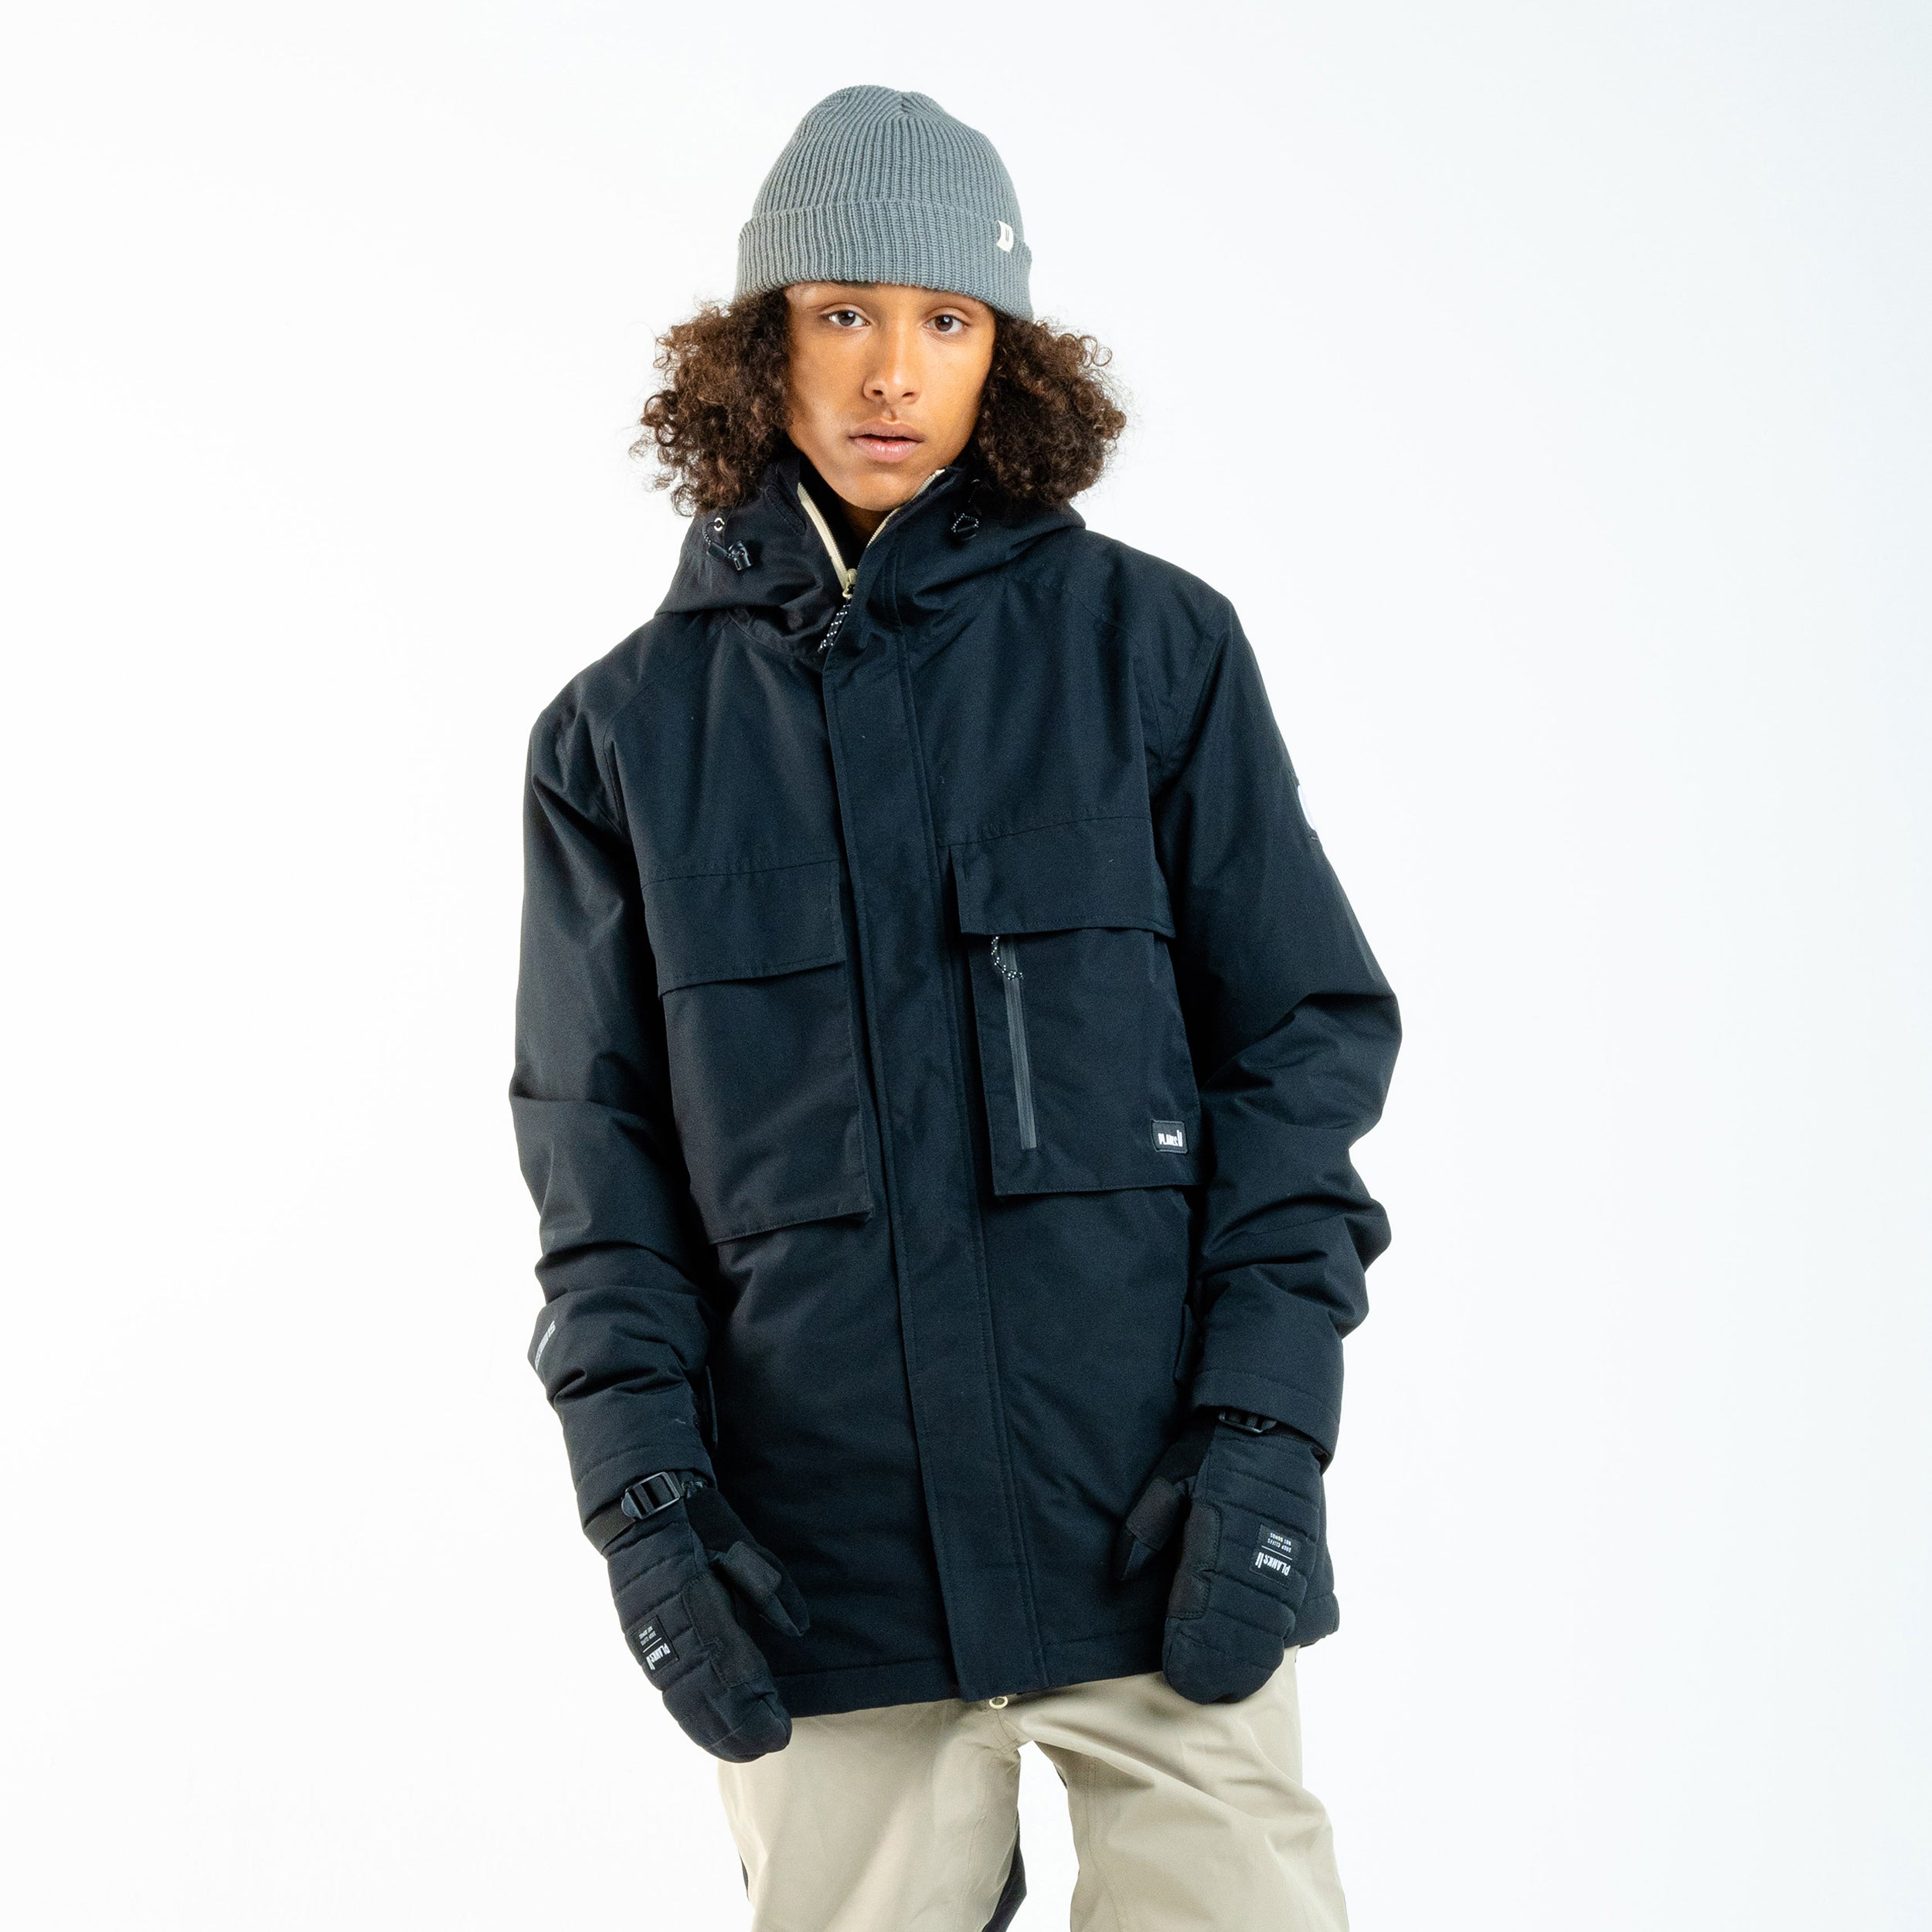 BEST SELLERS – Planks® - Skiwear, Clothing & Accessories